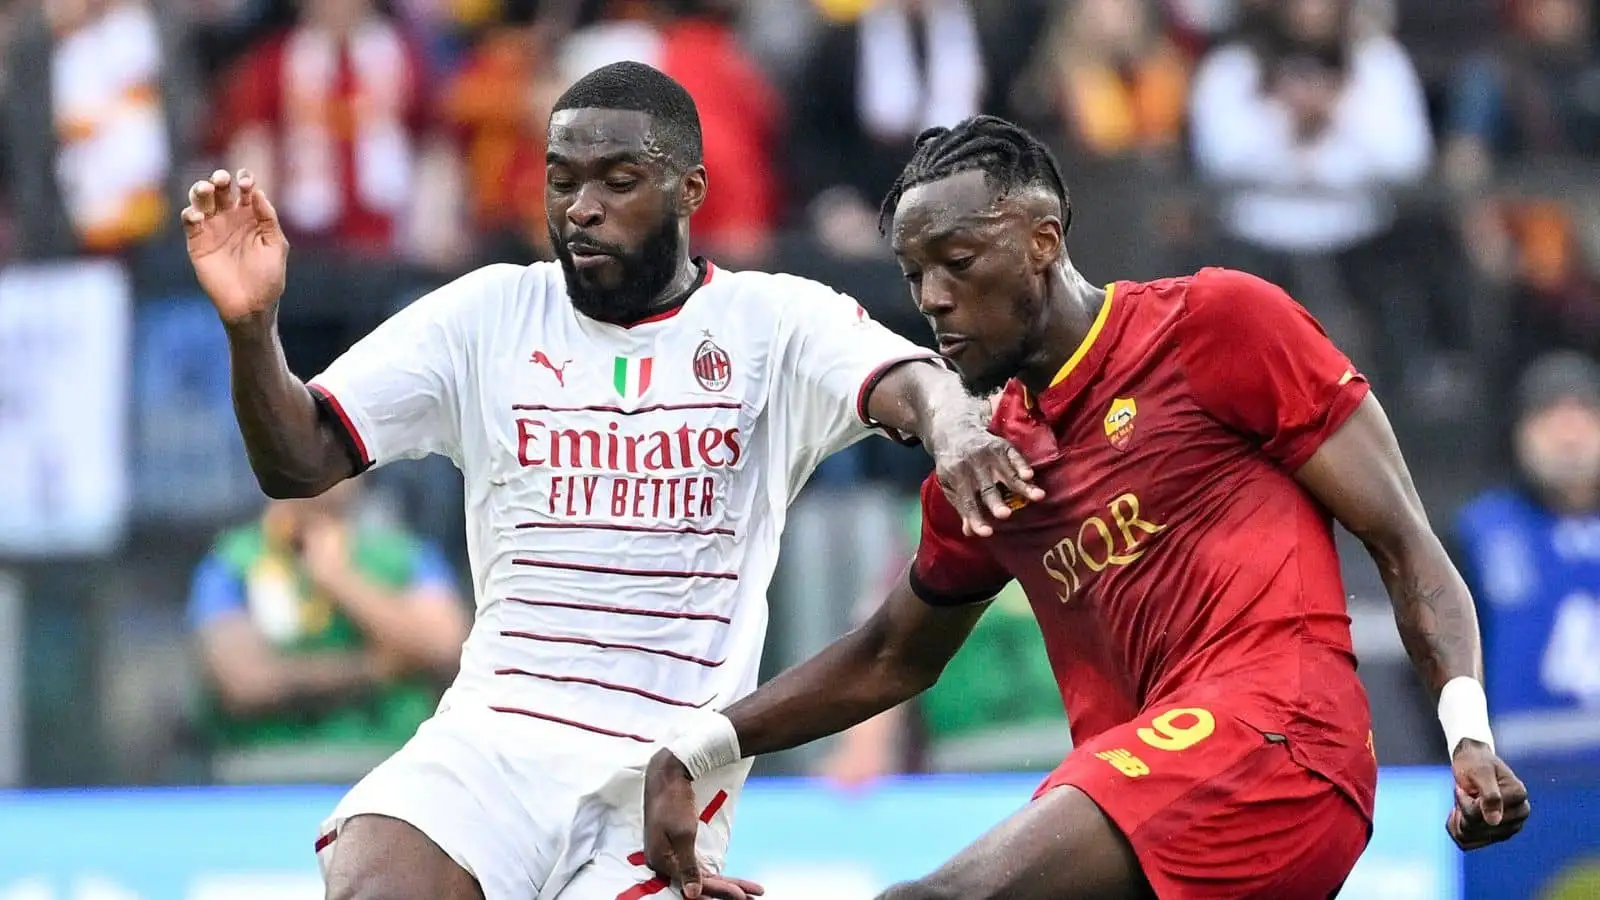 Fikayo Tomori of AC Milan and Tammy Abraham of AS Roma compete for the ball during the Serie A football match between AS Roma and AC Milan at Olimpico stadium in Rome